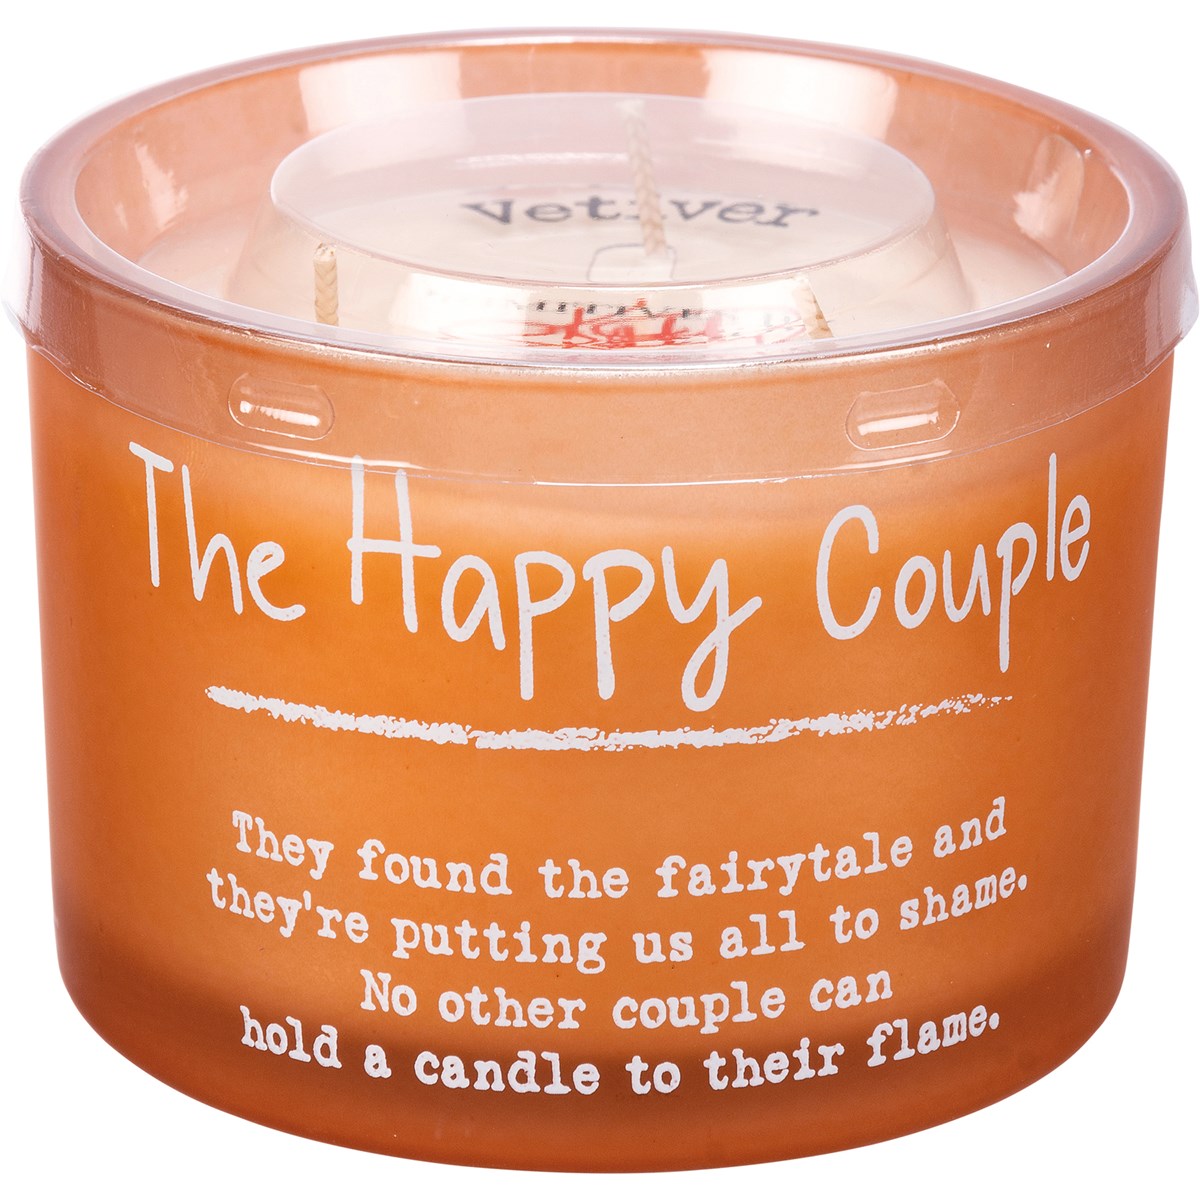 Jar Candle - The Happy Couple - 14 oz., 4.50" Diameter x 3.25" - Soy Wax, Glass, Cotton